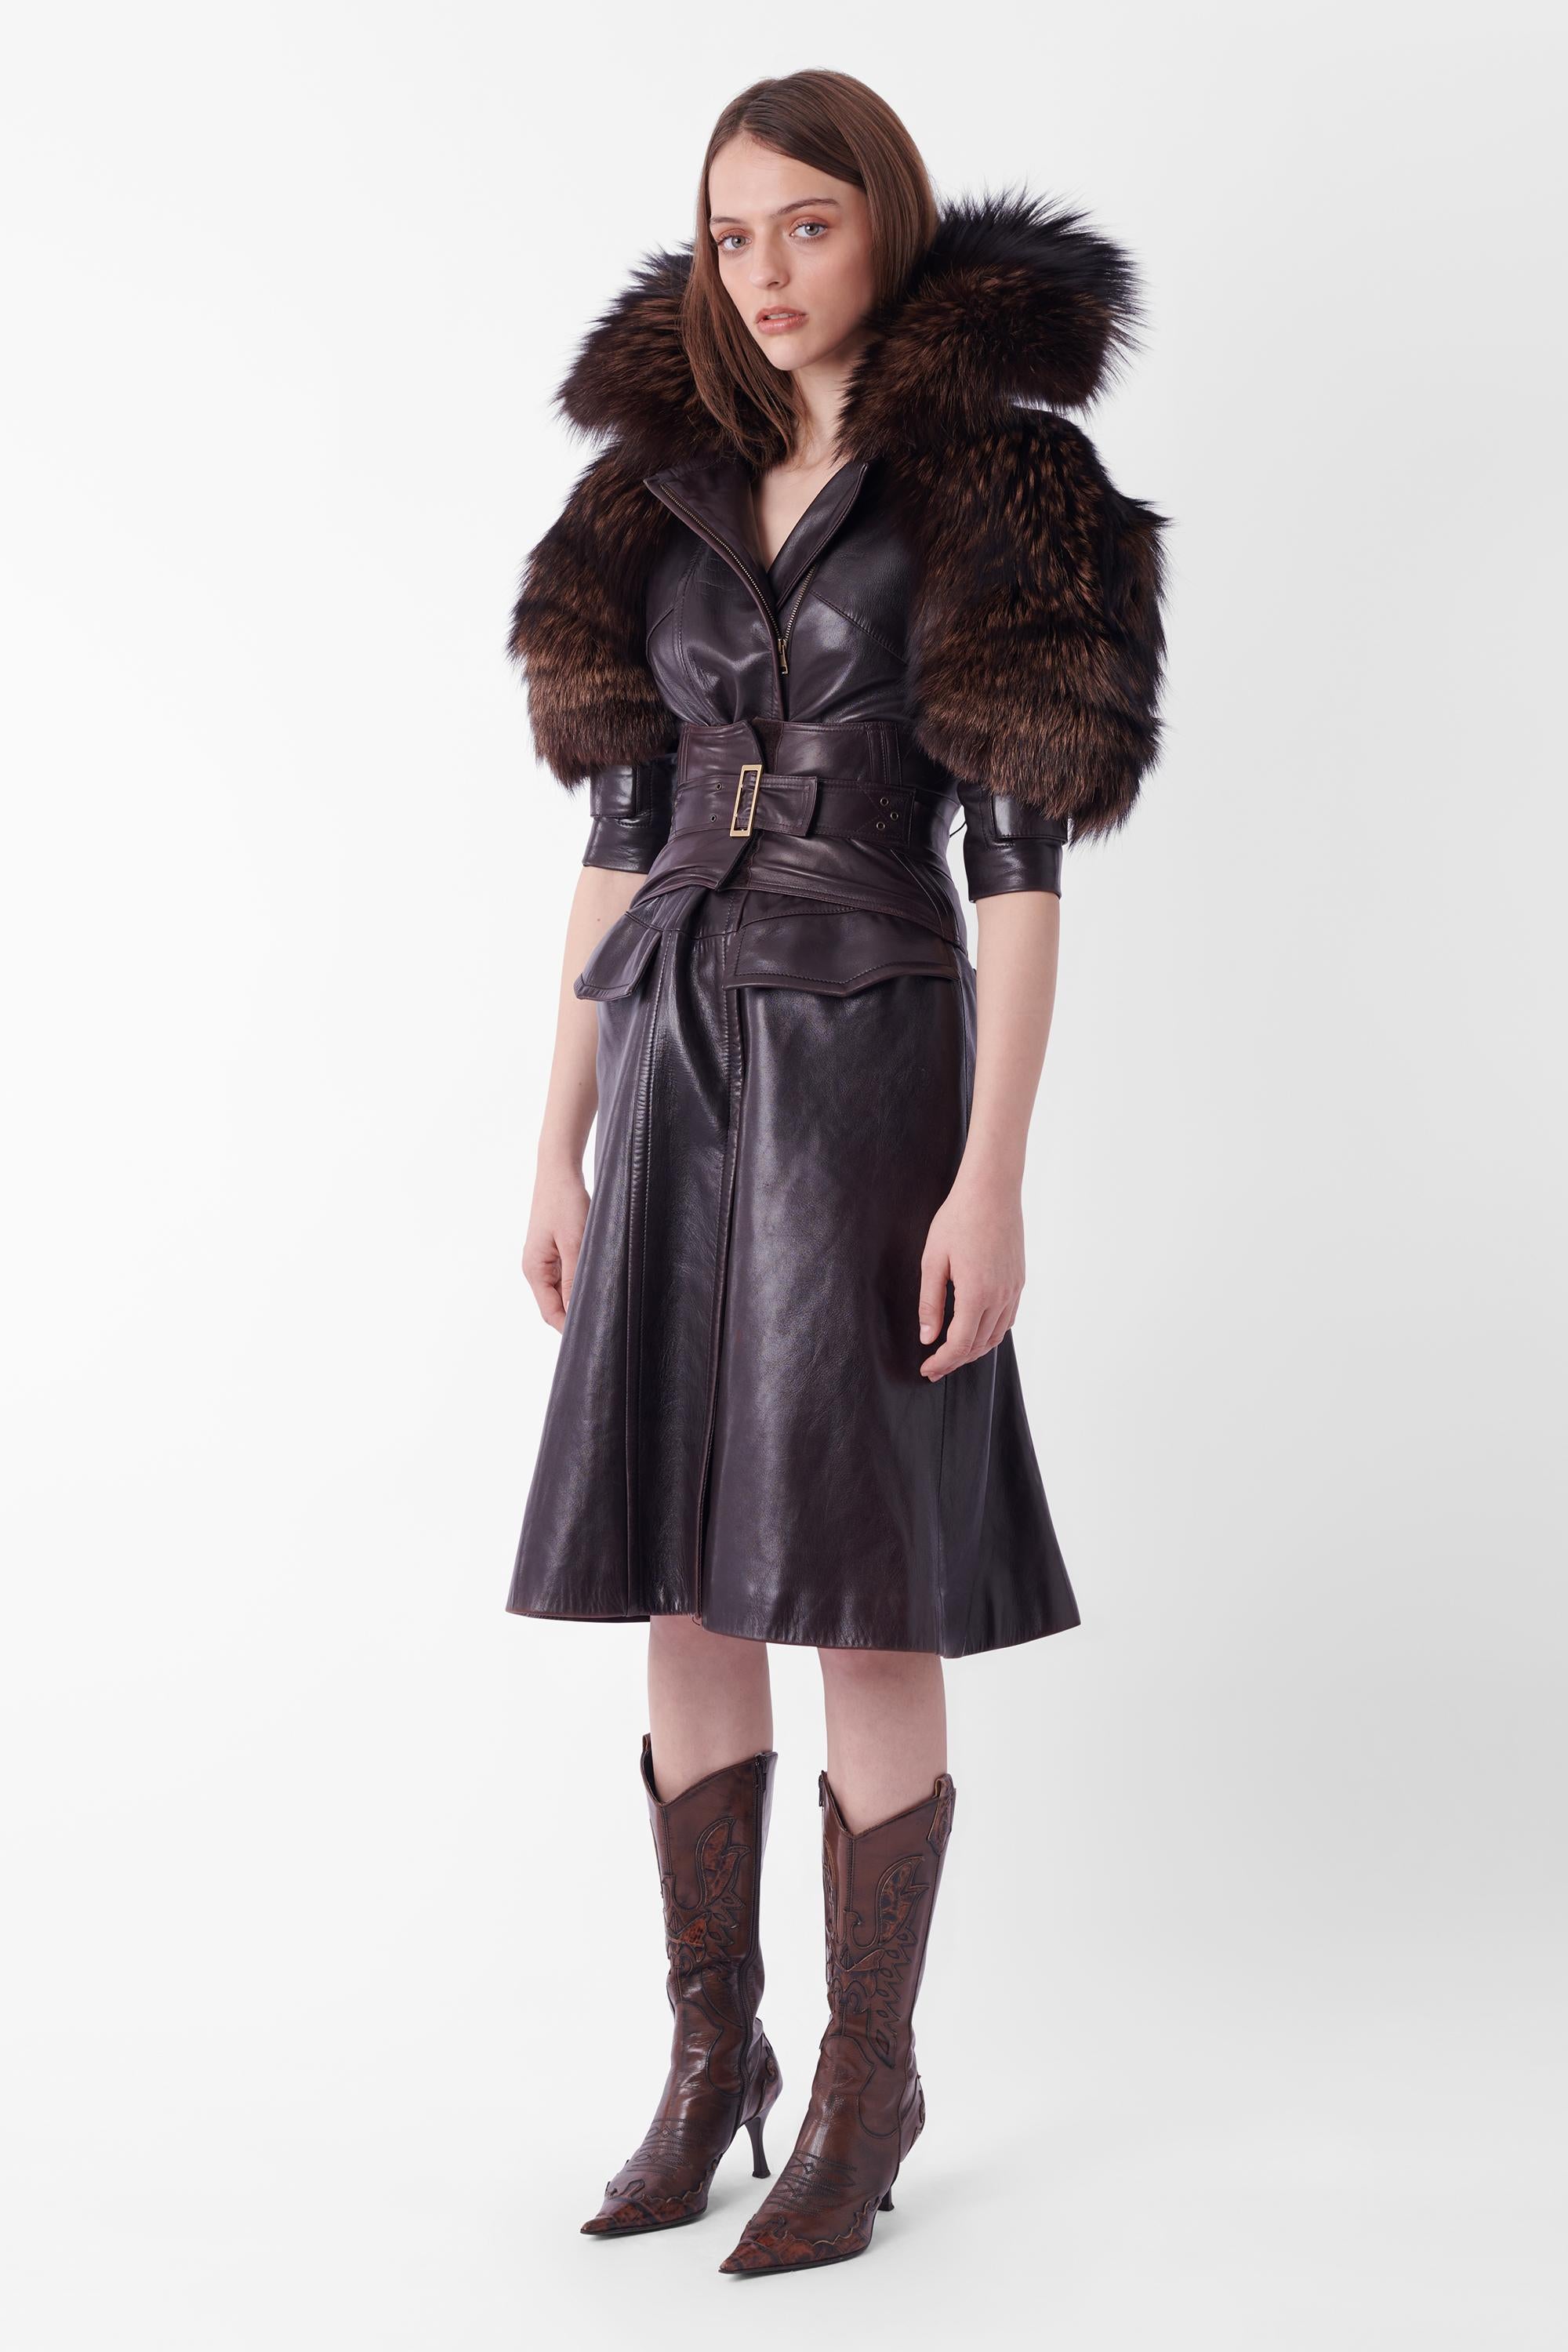 Women's Gucci Vintage F/W 2003 Runway Leather Coat with Fur & Leather Corset Belt